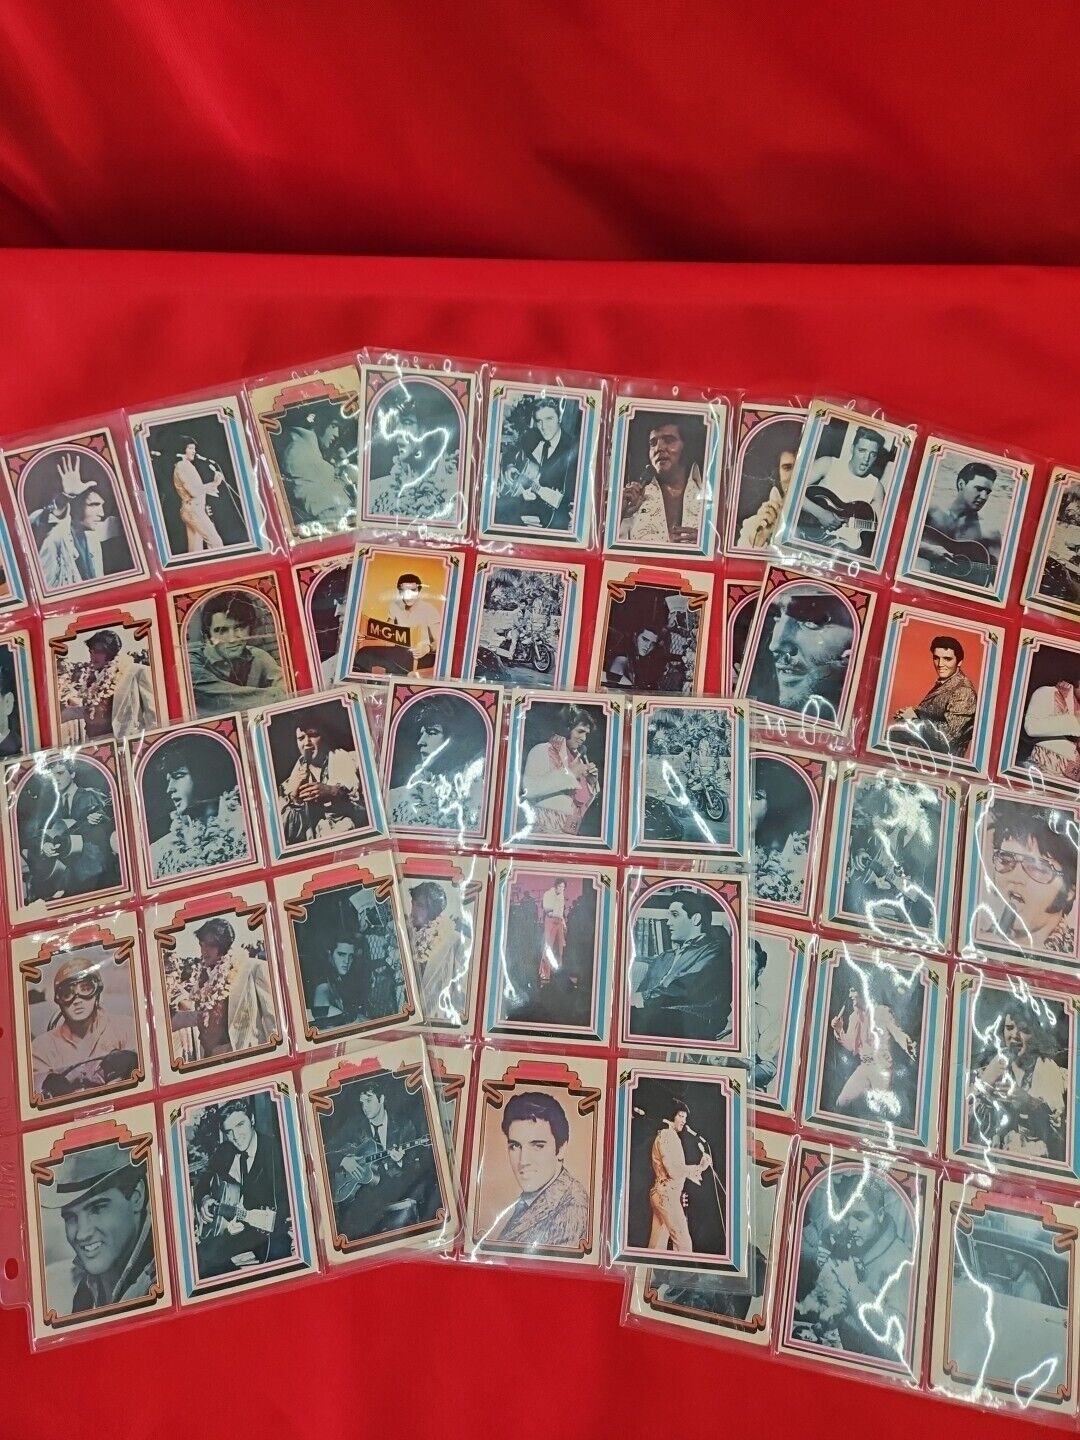 1978 ELVIS PRESLEY Vintage Boxcar Brand Trading Card Collectible Lot of 51 Cards